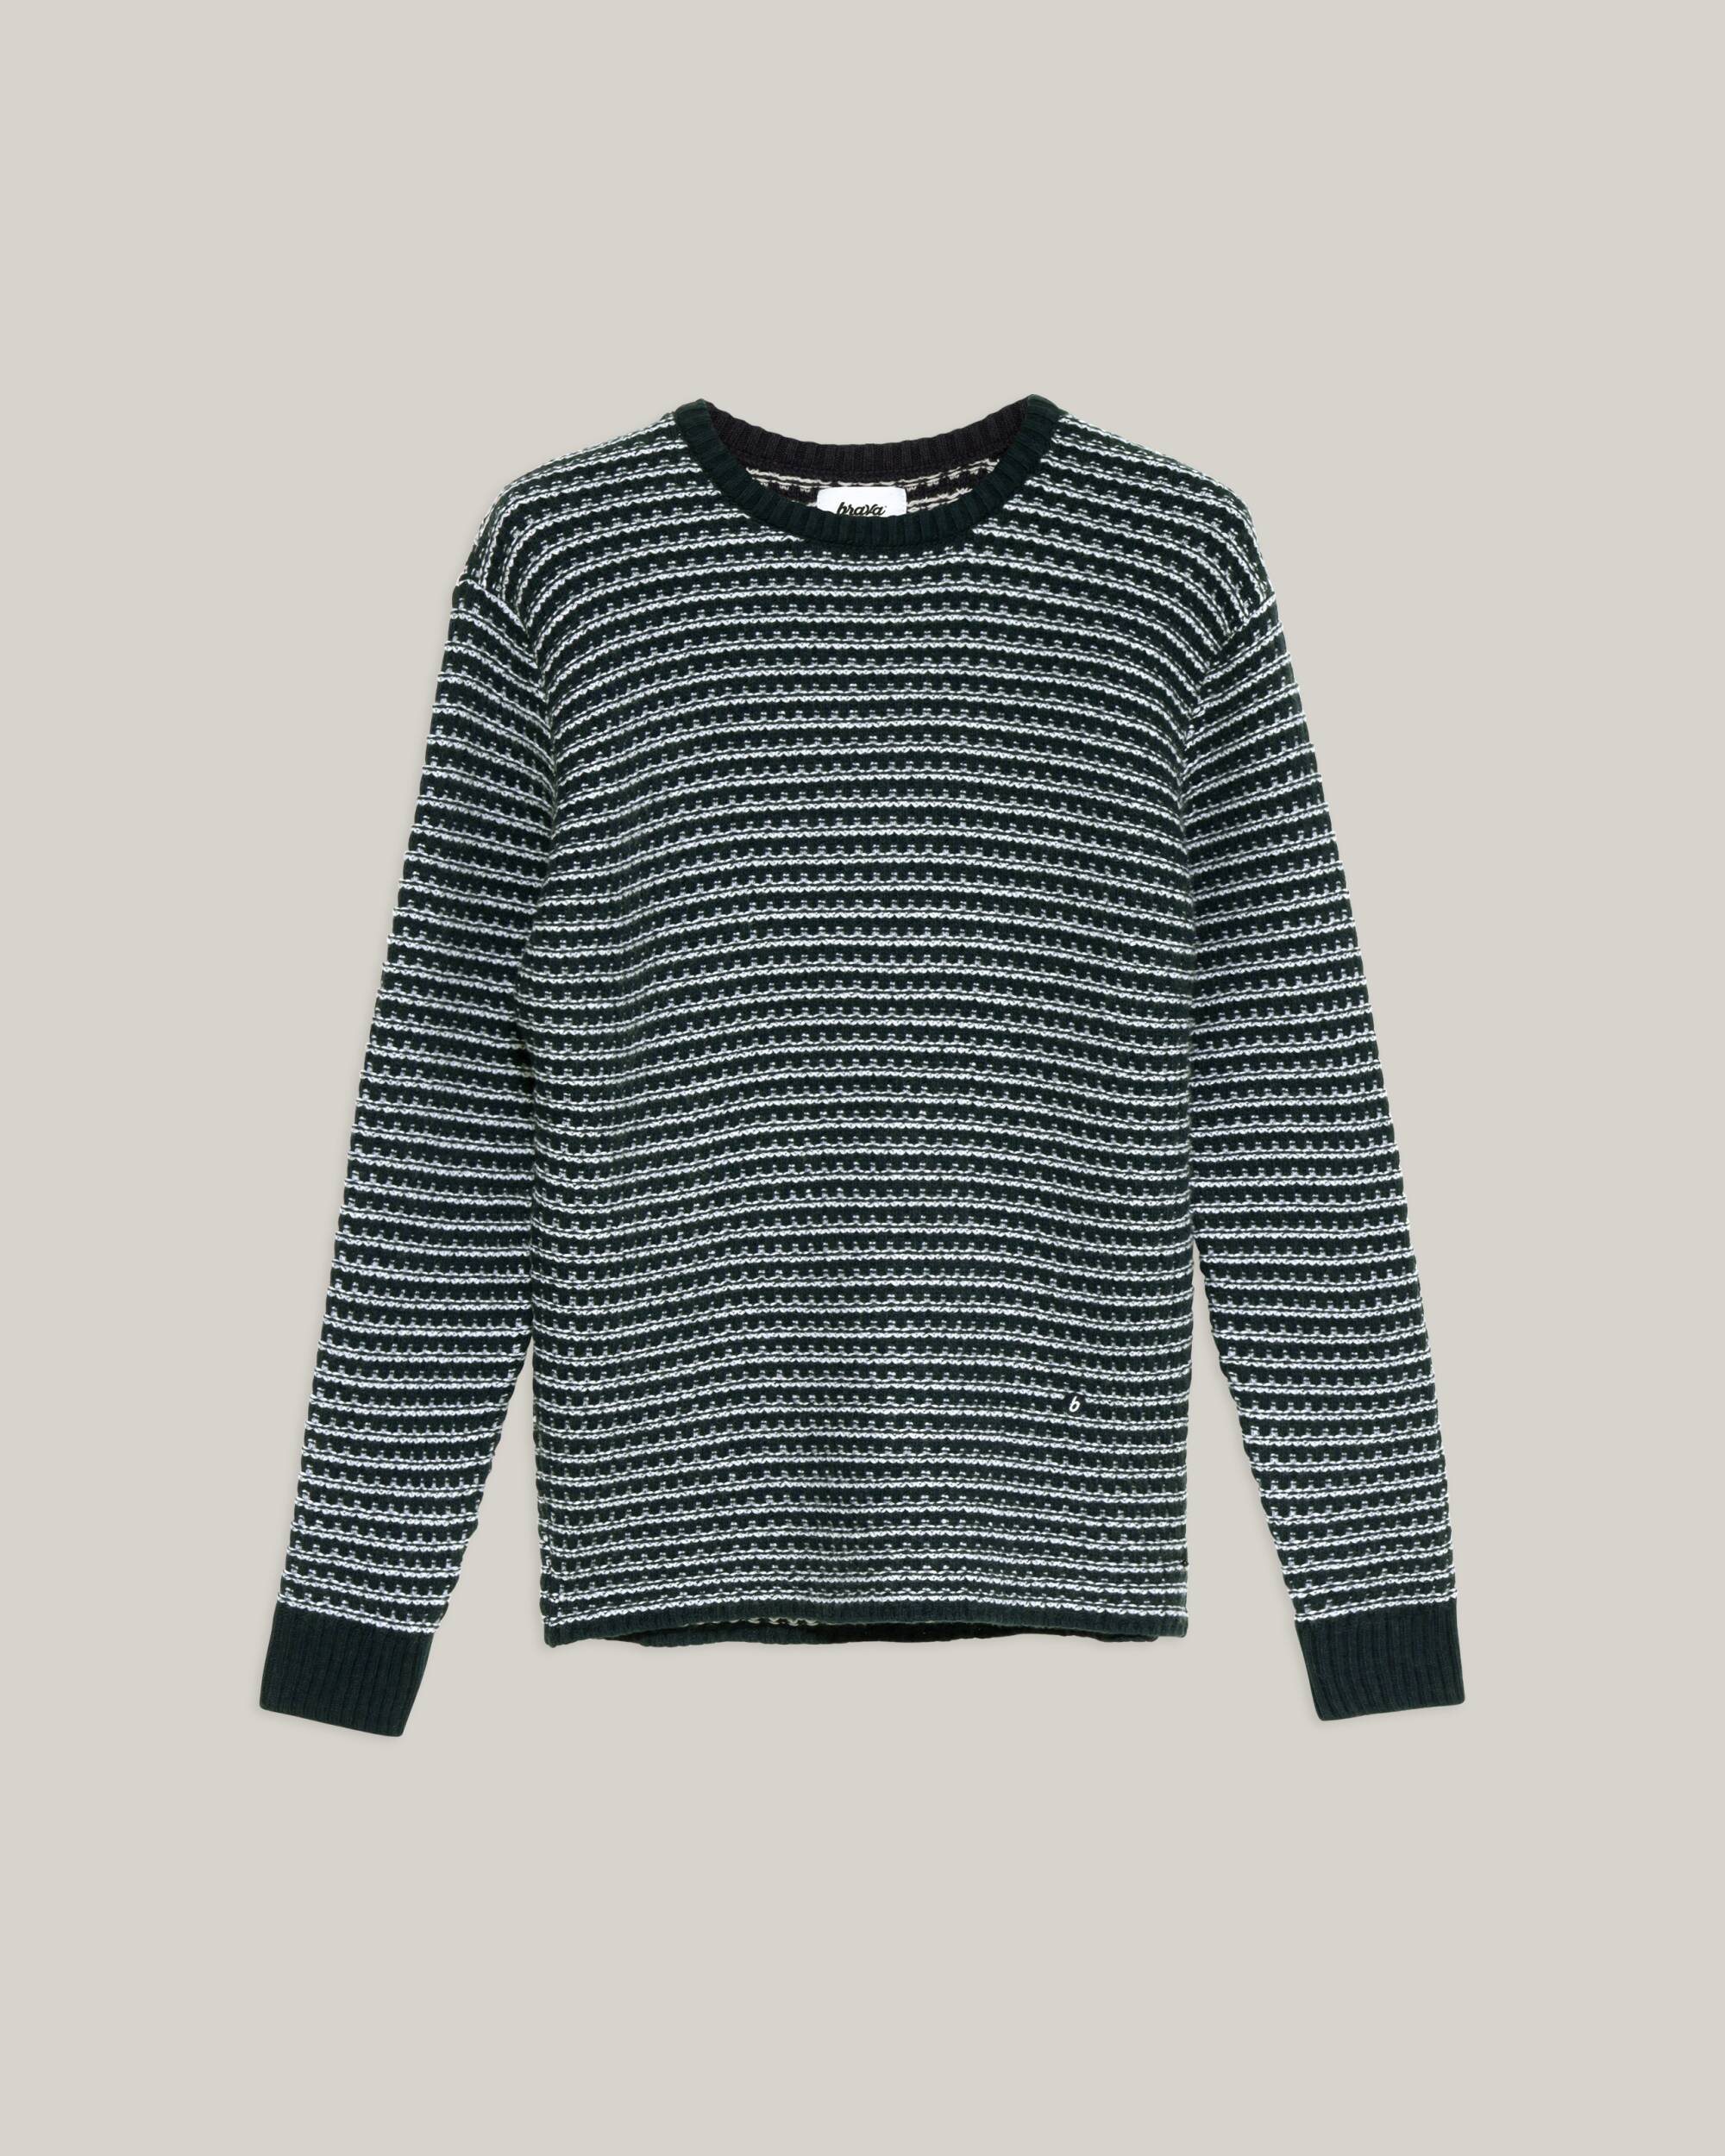 Striped sweater navy in blue and white made from recycled materials such as cashmere and wool from Brava Fabrics